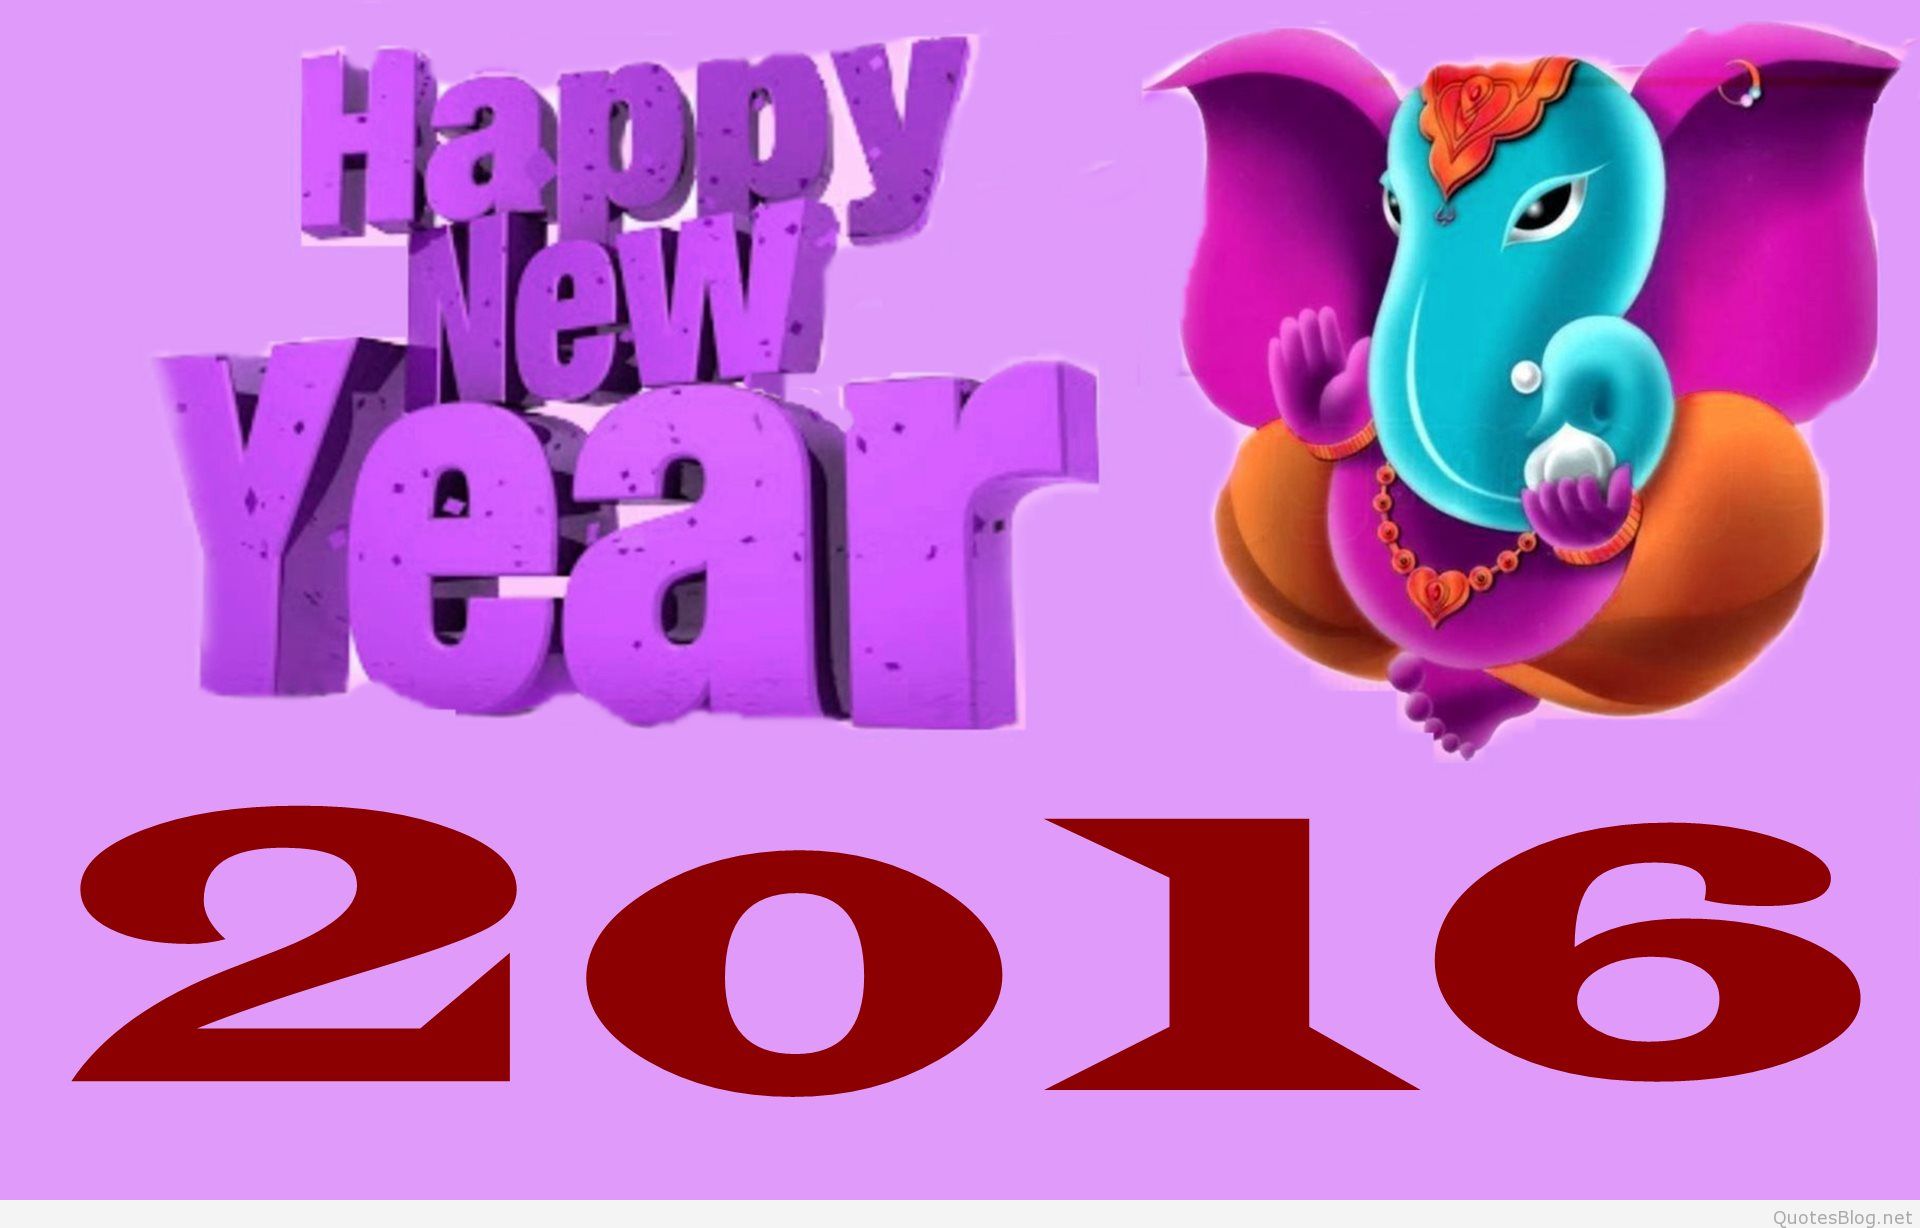 Happy new year sayings wallpapers 2016 2017